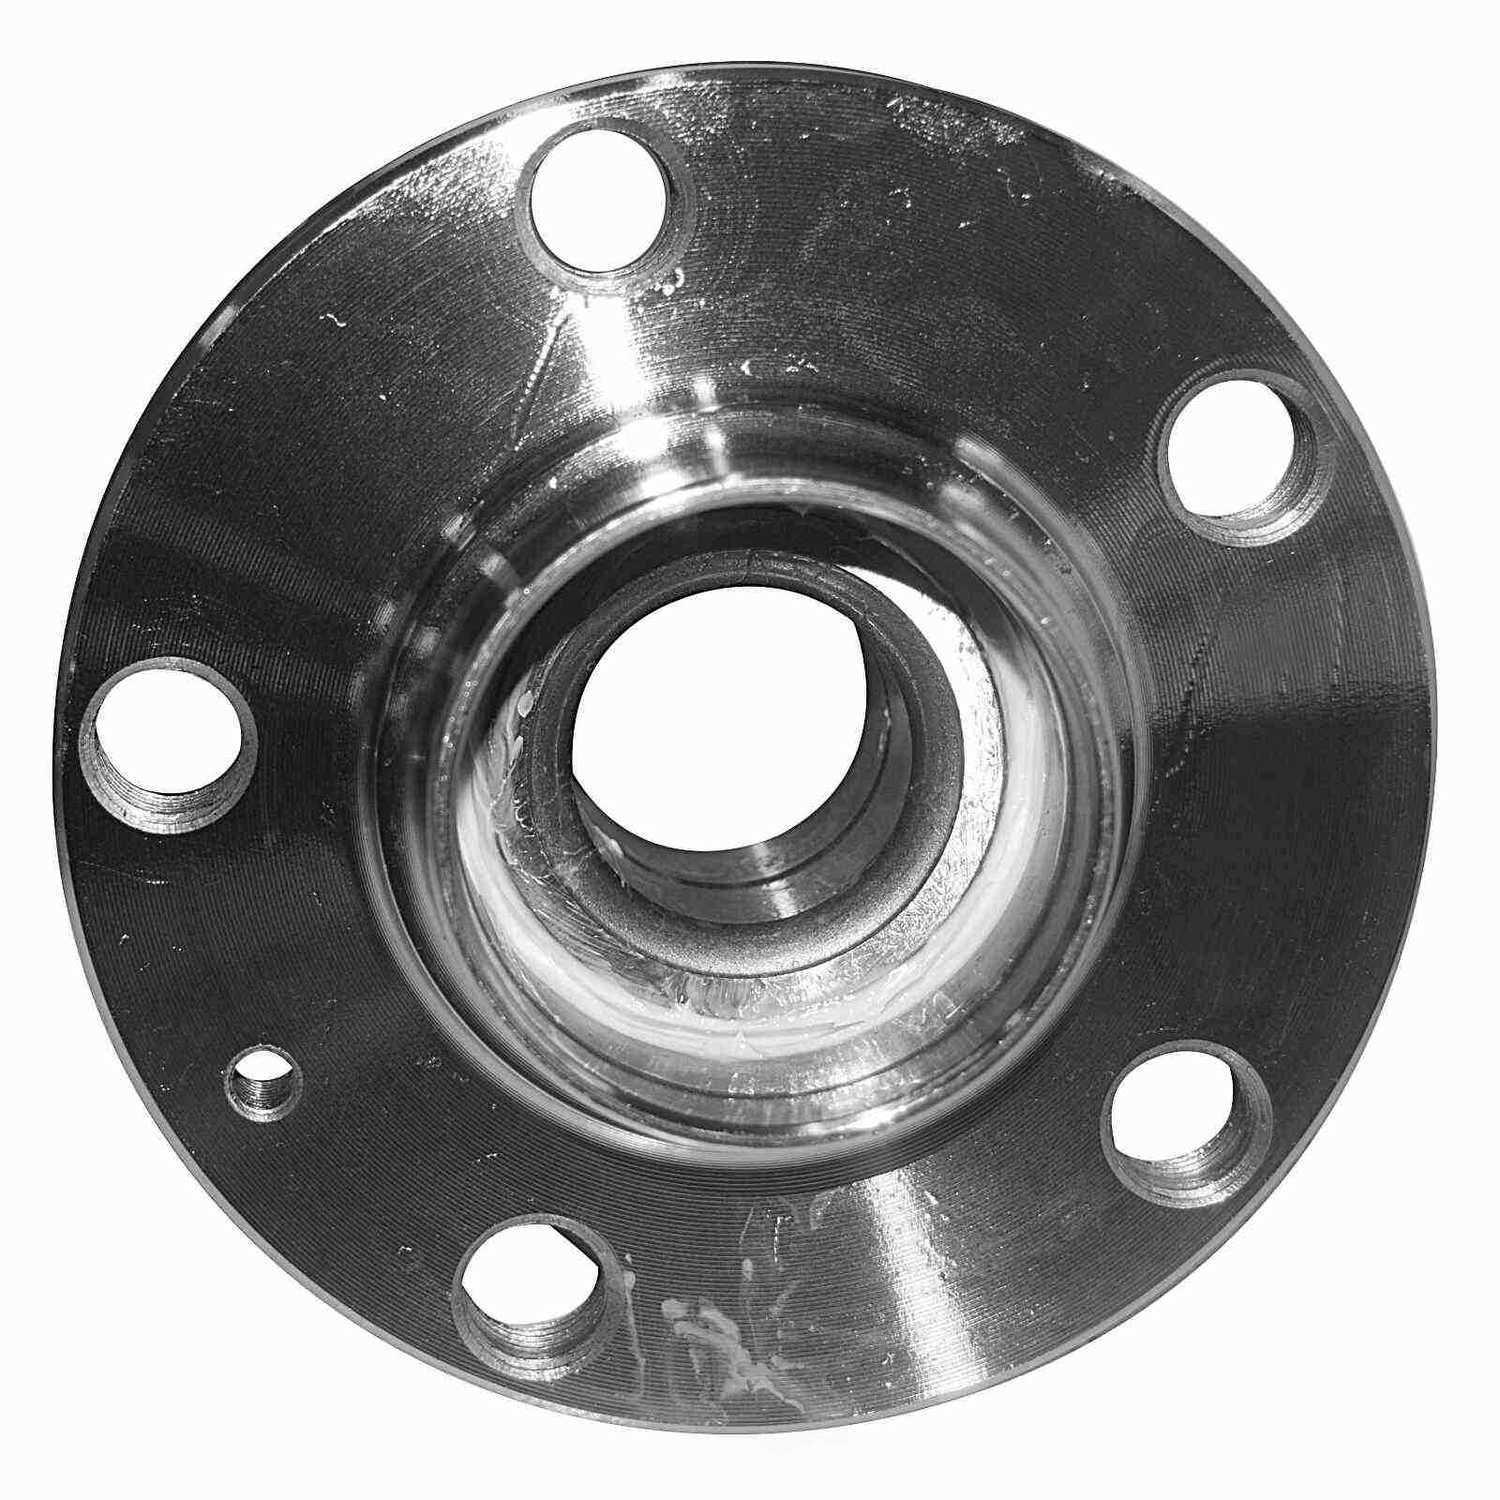 GSP NORTH AMERICA INC. - GSP Axle Bearing & Hub Assembly (Rear) - AD8 233012